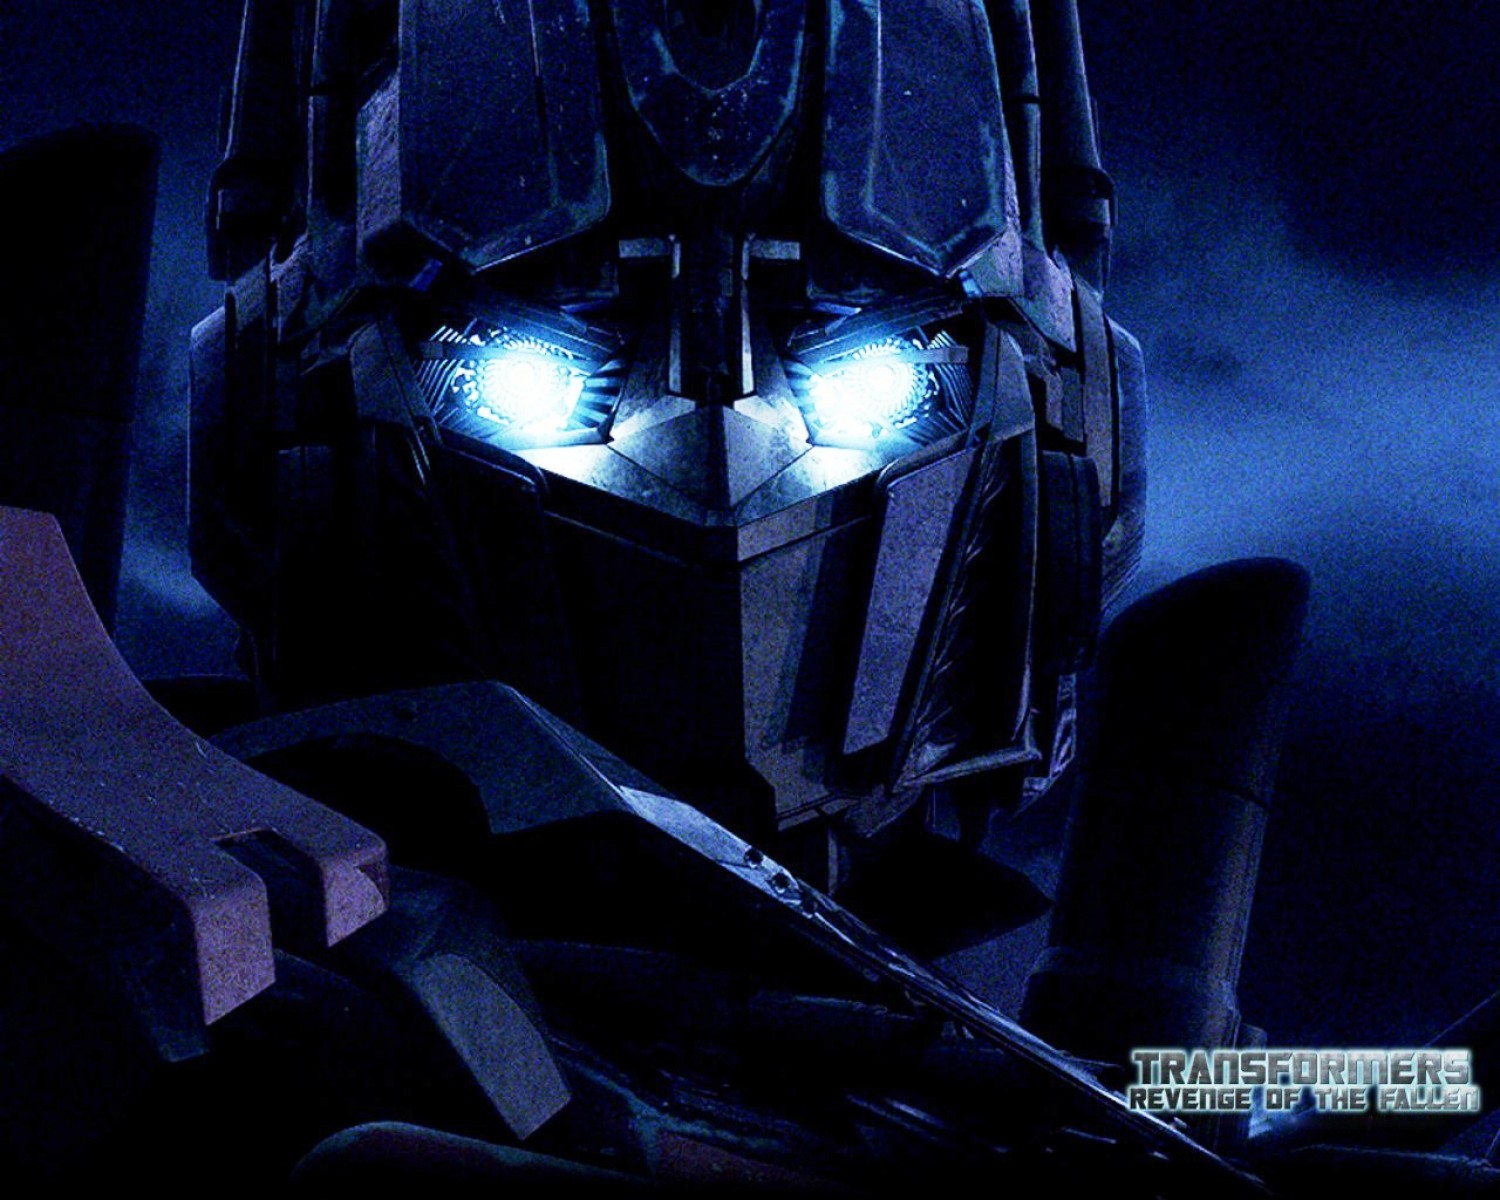  Transformers HD Wallpapers 